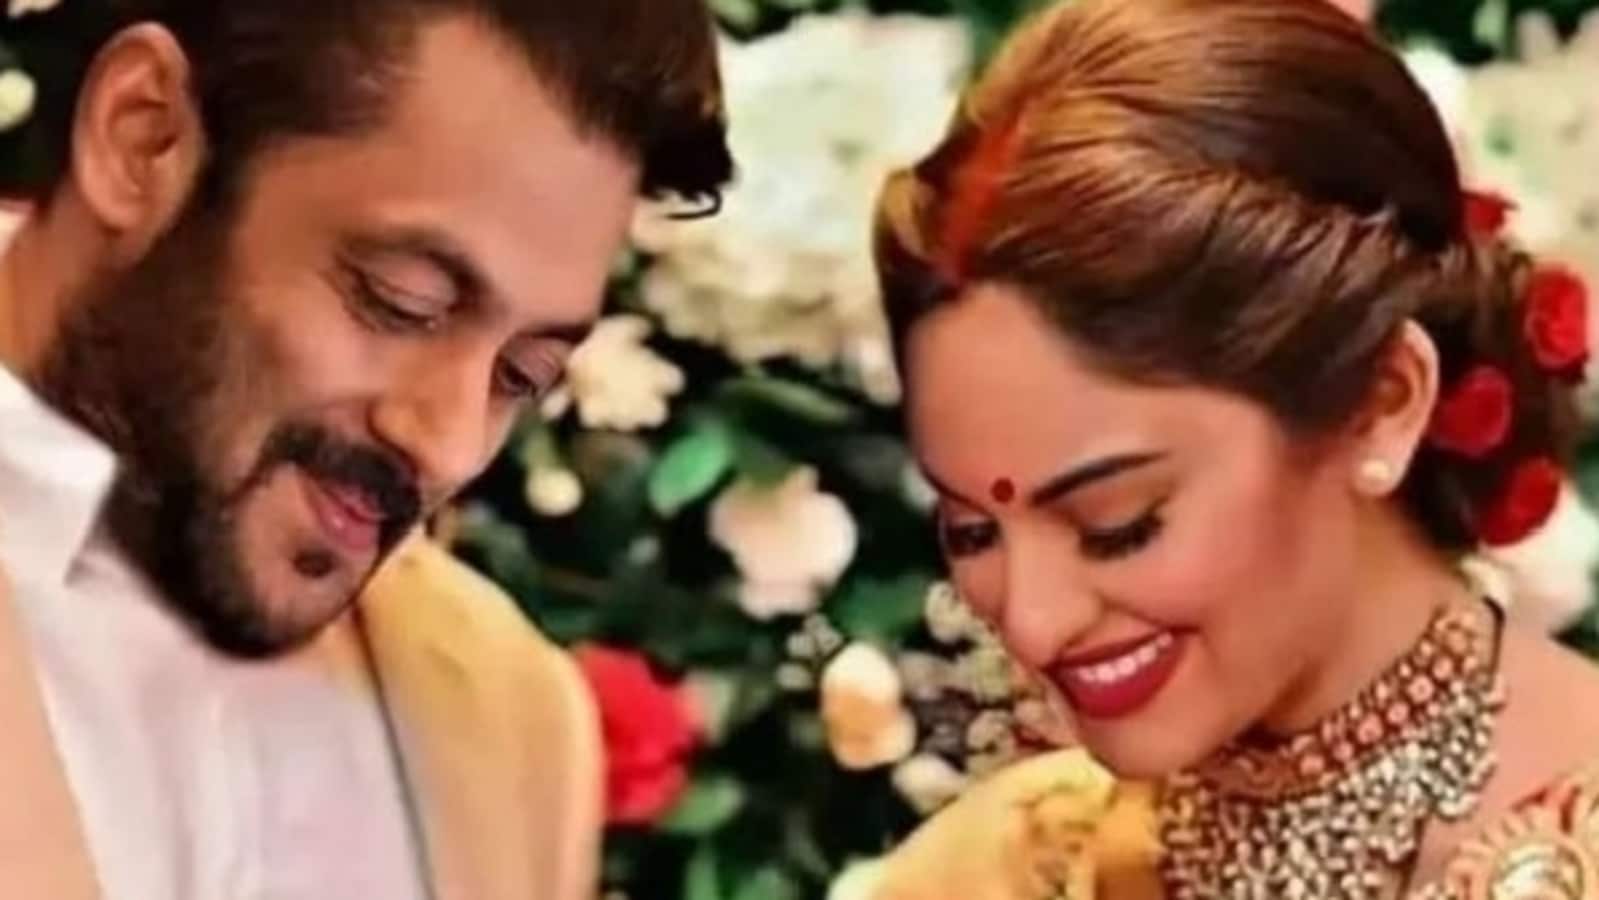 Salman, Sonakshi's fans are confused as fake pic shows them as a married  couple | Bollywood - Hindustan Times